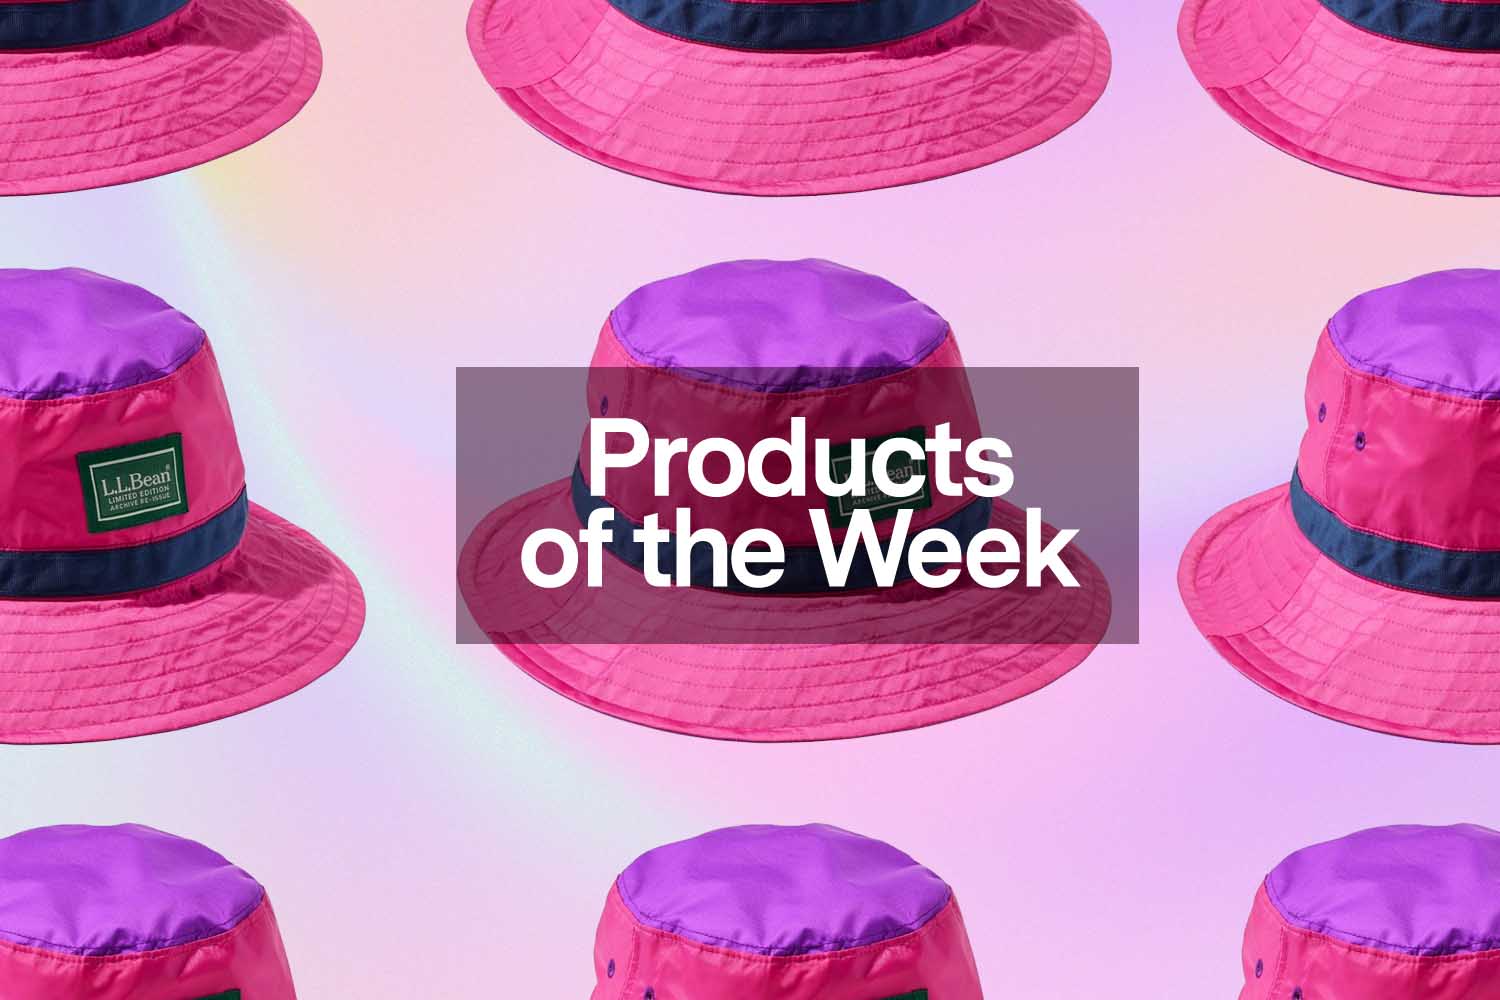 Products of the Week: Polo MLB Gear, Agave-Inspired Chacos and an L.L.Bean Archival Collection